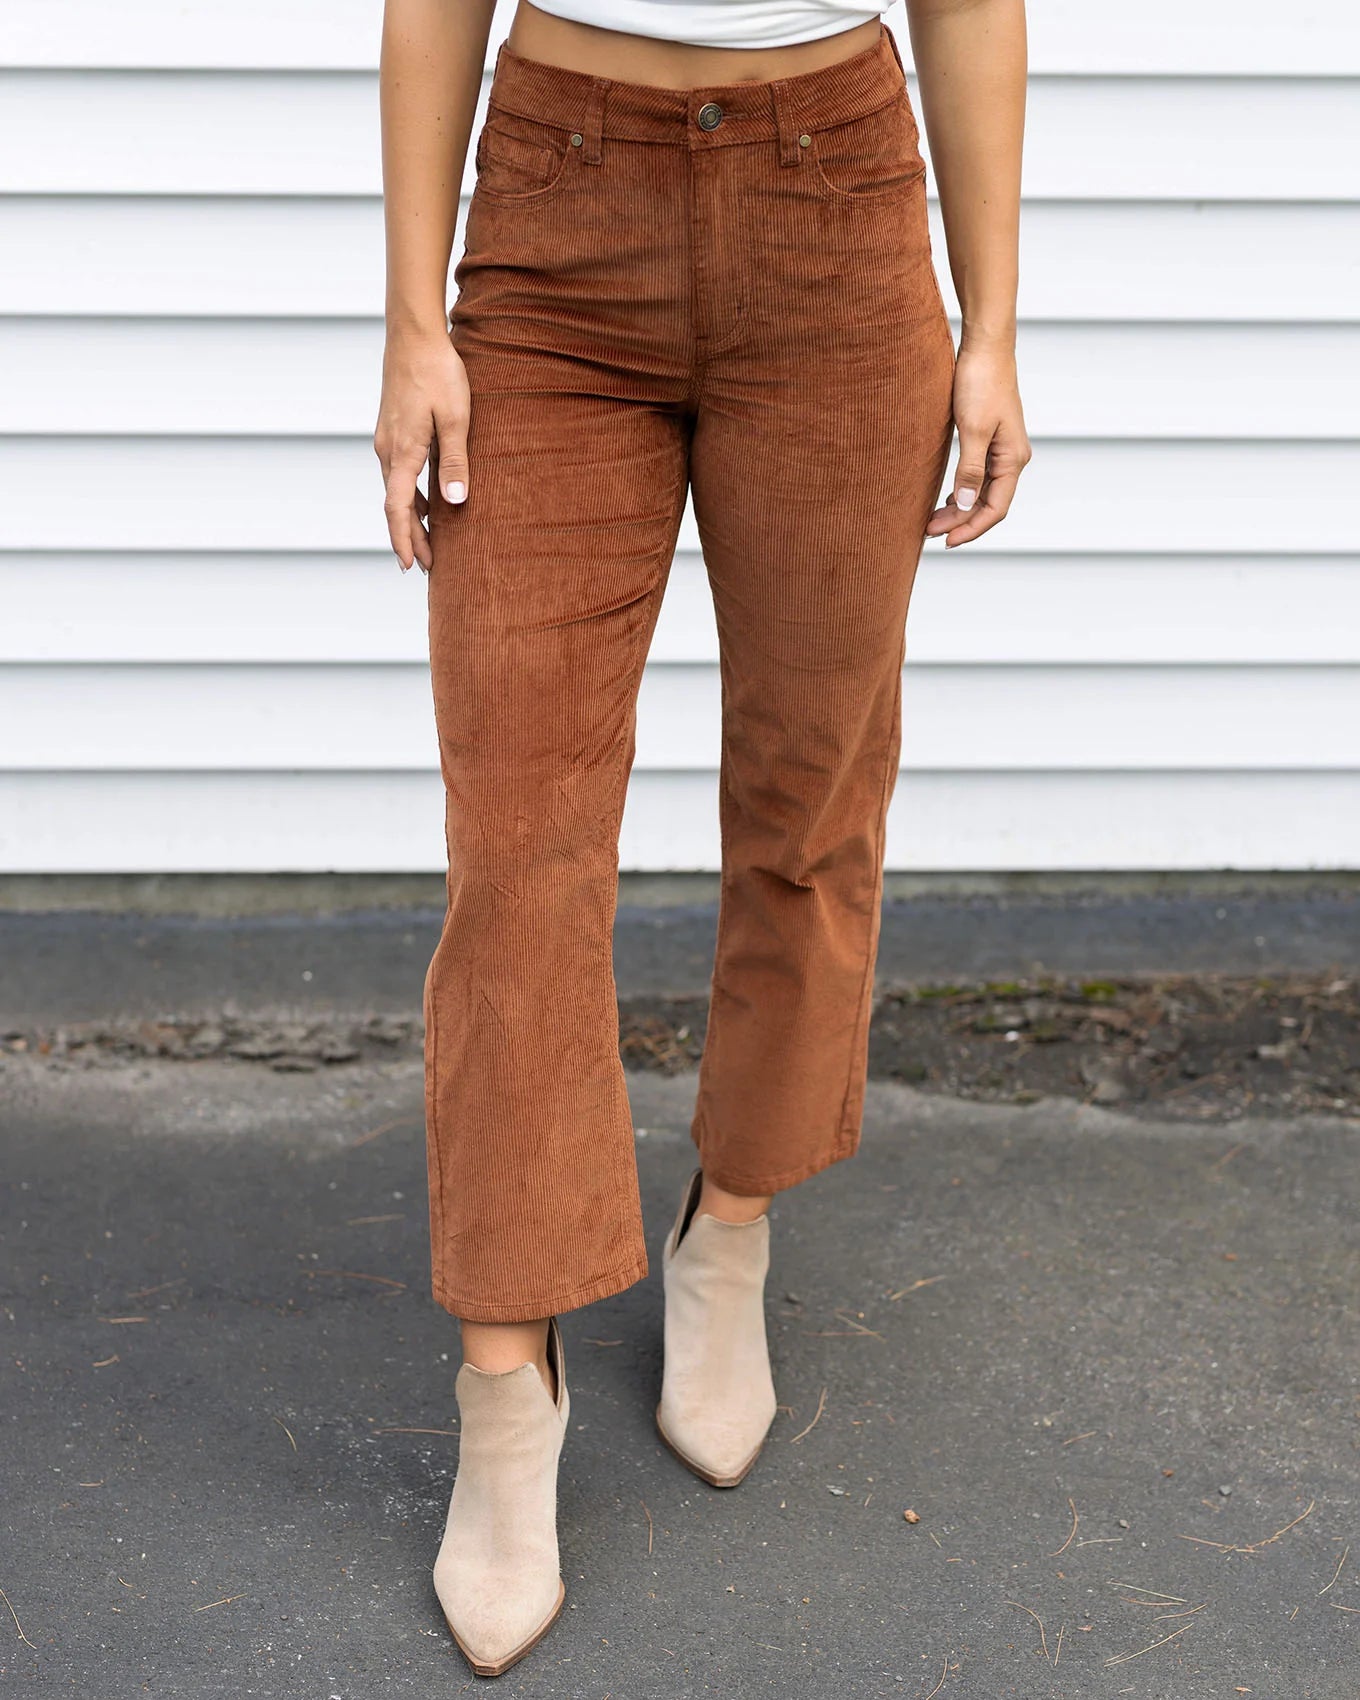 Whiskey Mel's Fave Straight Leg Corduroy Pants by Grace & Lace (Ships in 1-2 Weeks)